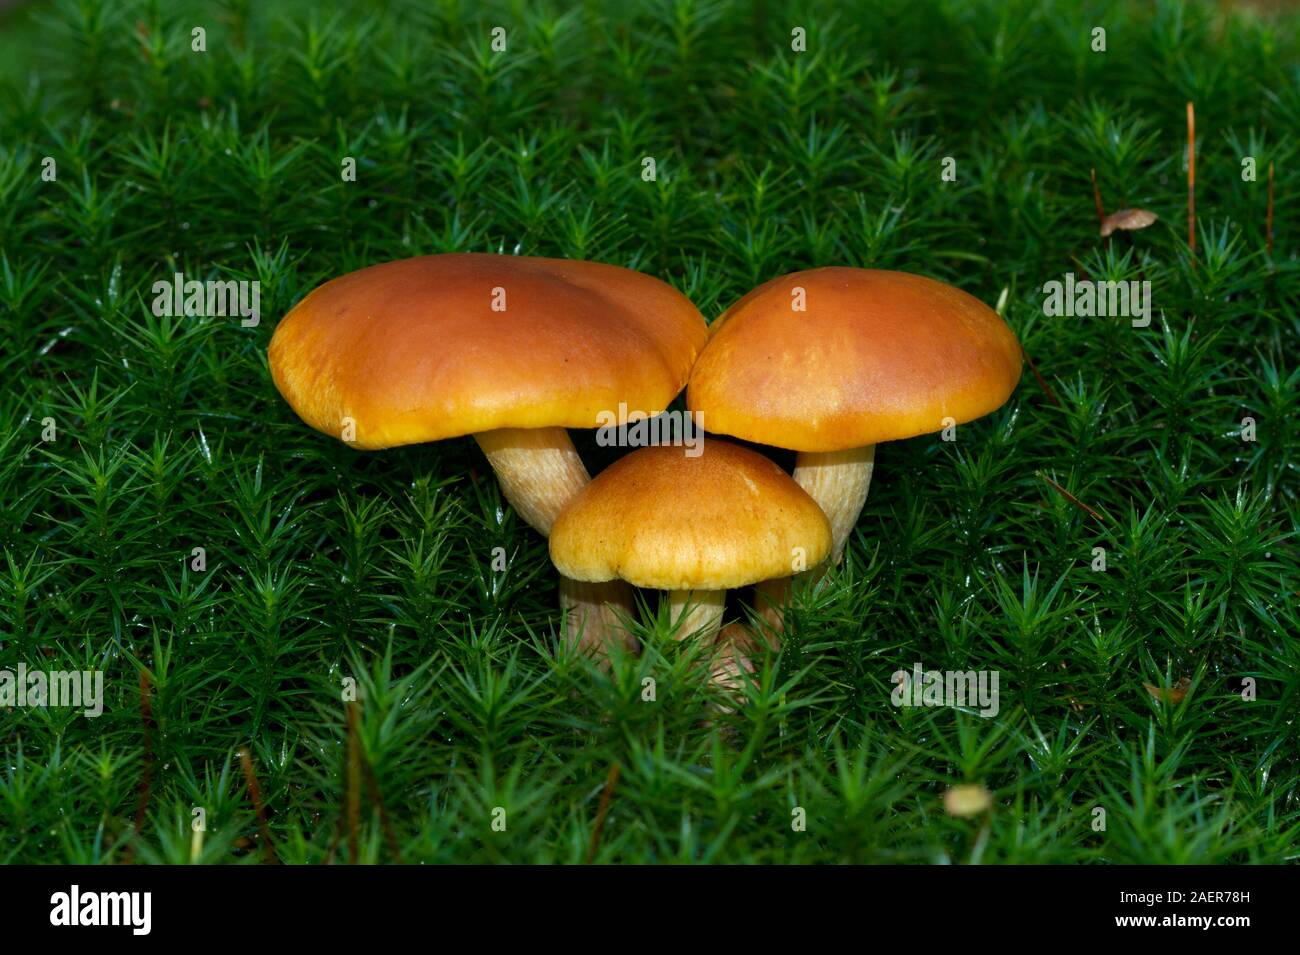 Group of three Scaly Rustgill mushrooms growing in moss Stock Photo